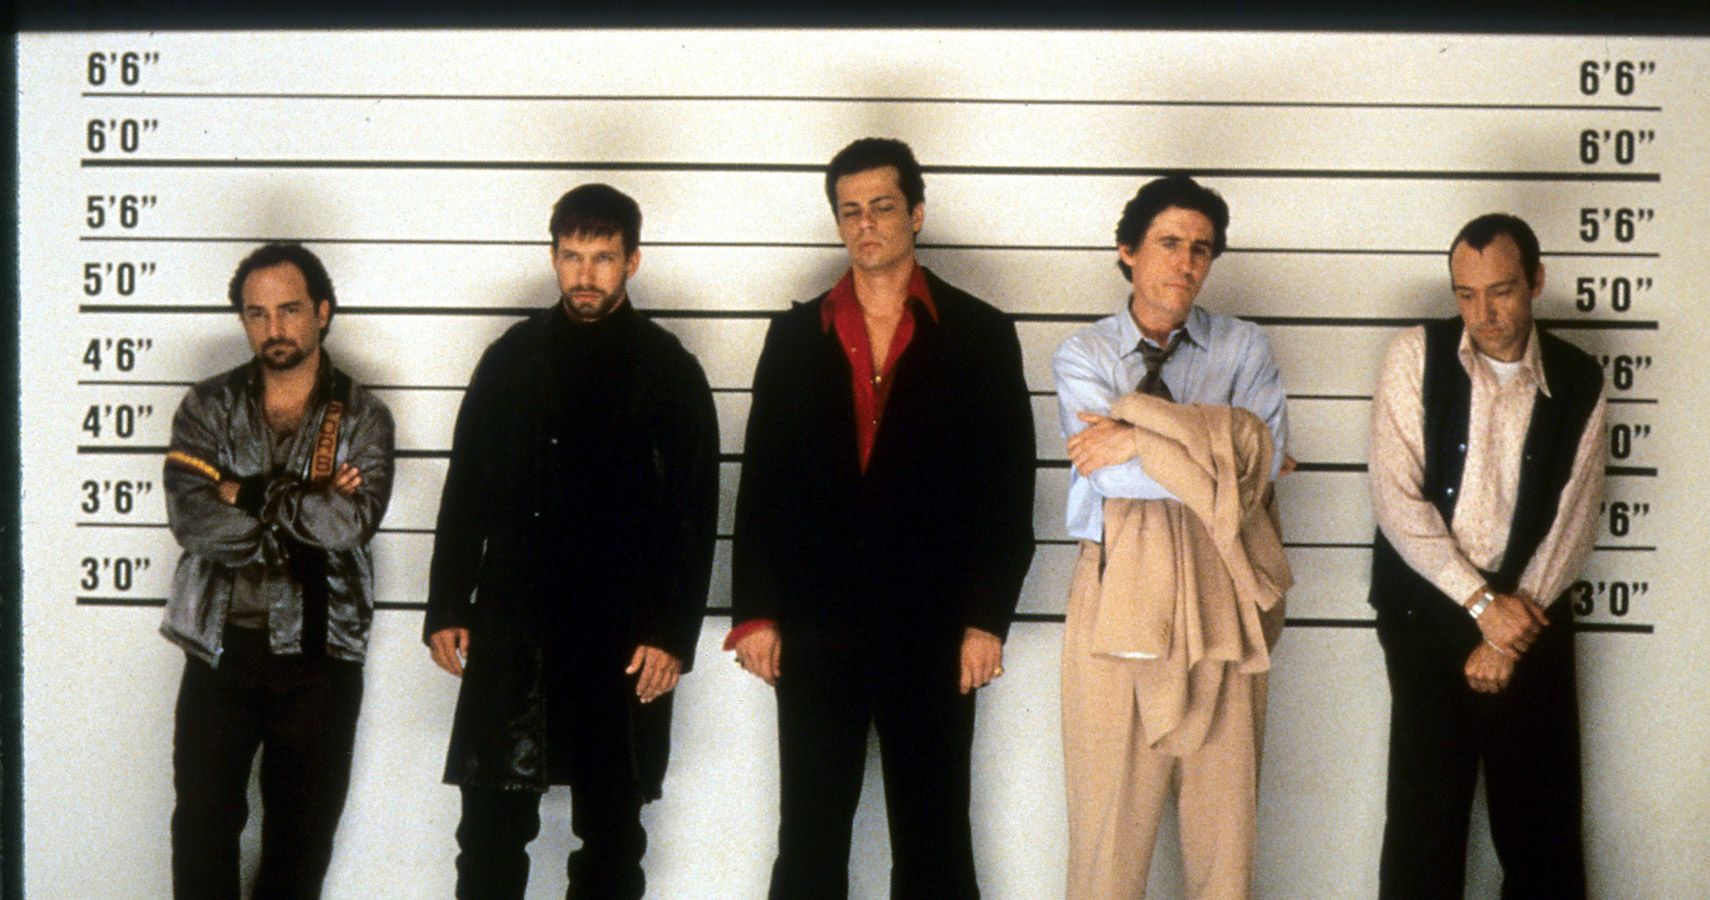 Who is Keyser Söze🗣️⁉️, Movie The Usual Suspects, #fy #edit #edits #f, the usual suspects